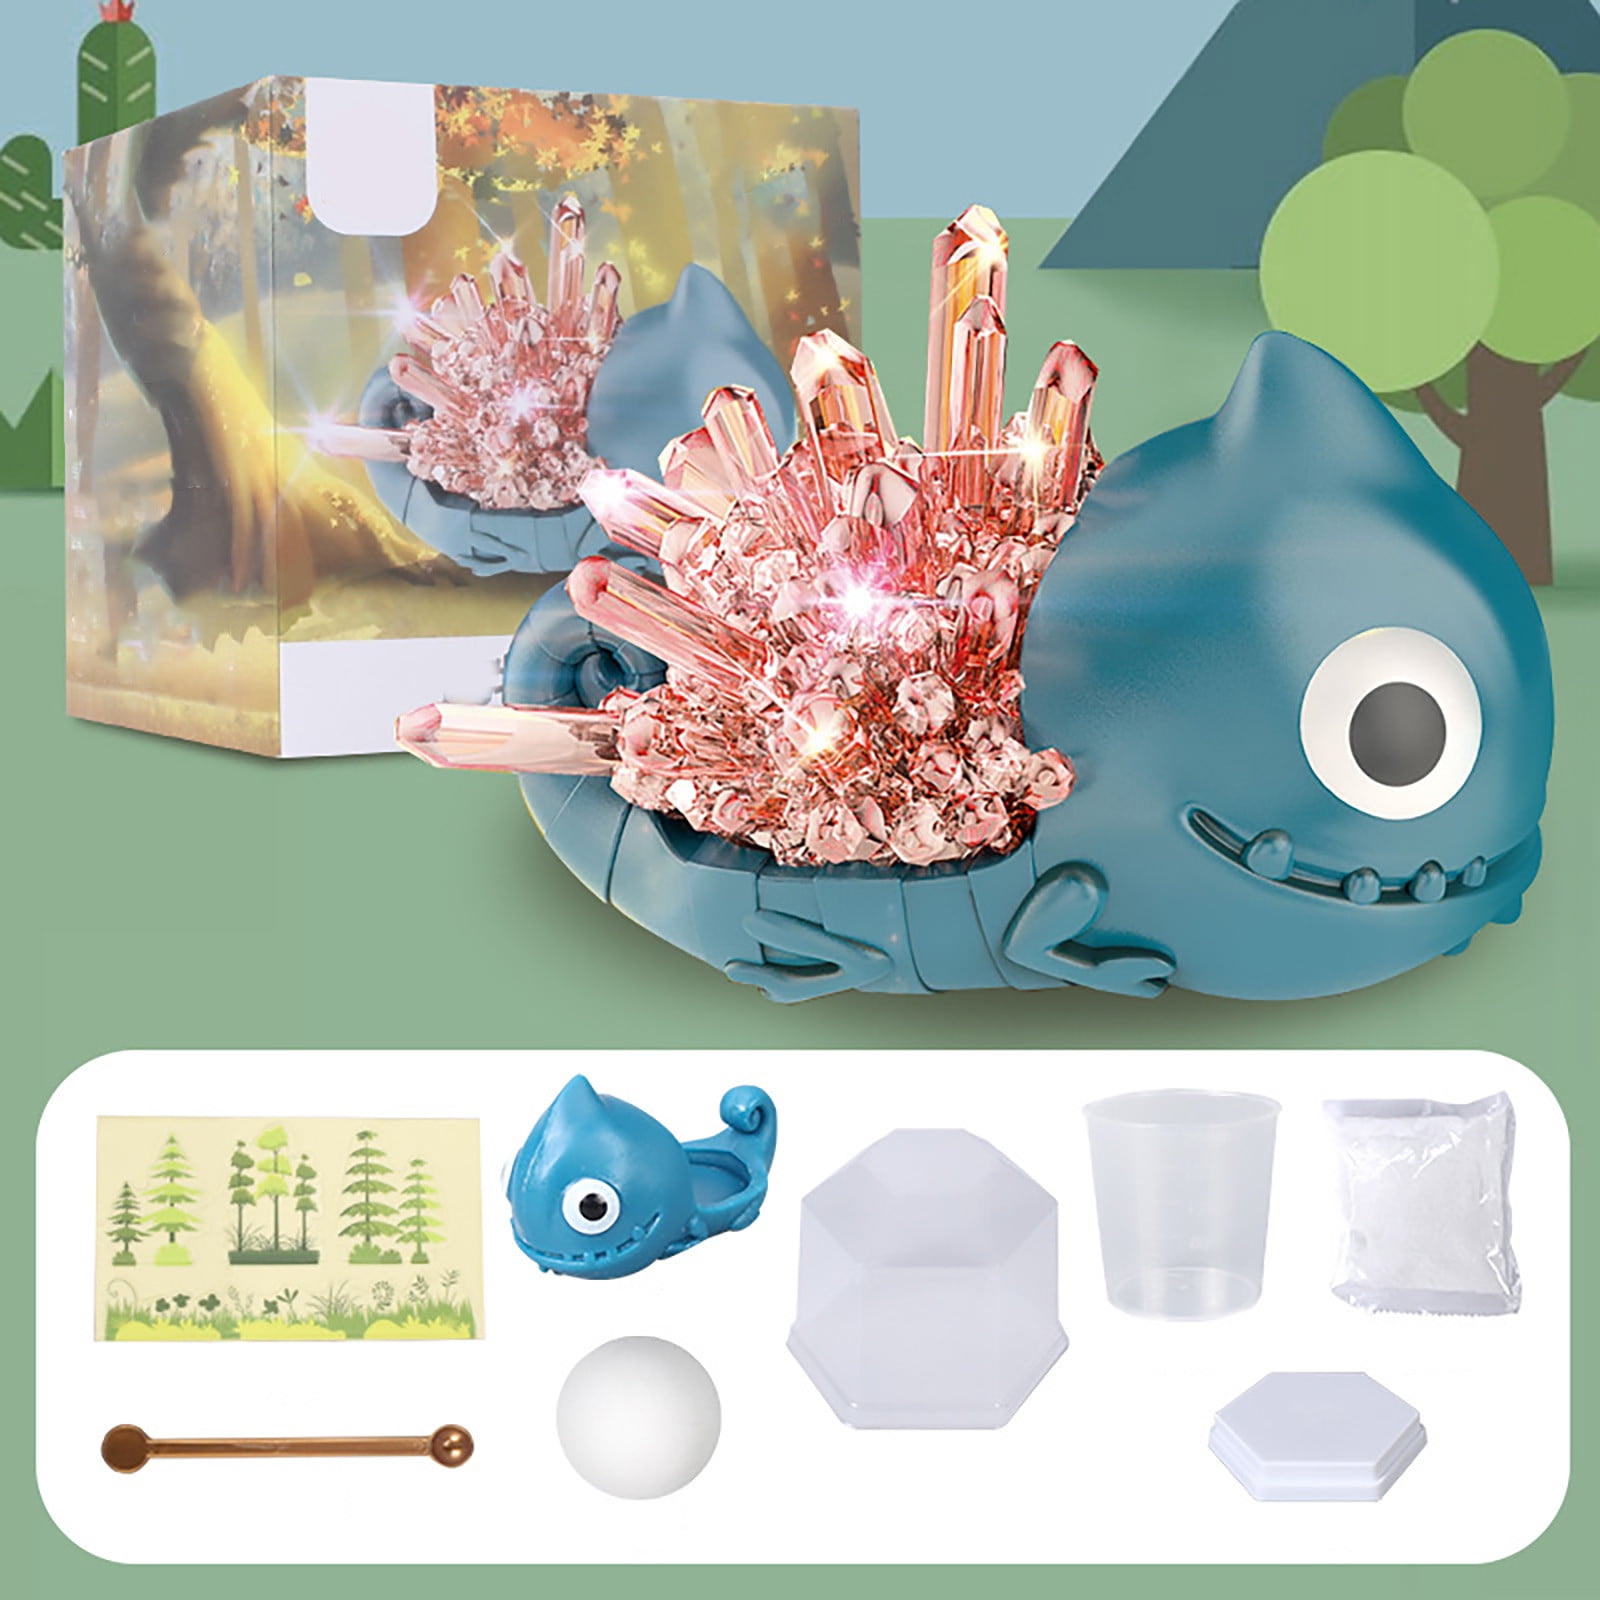 Animal Crystal Growing Kit For Kids Science Kits For Kids Grow Crystal  Science Experiments Toys DIY Projects Learning & Educatio 